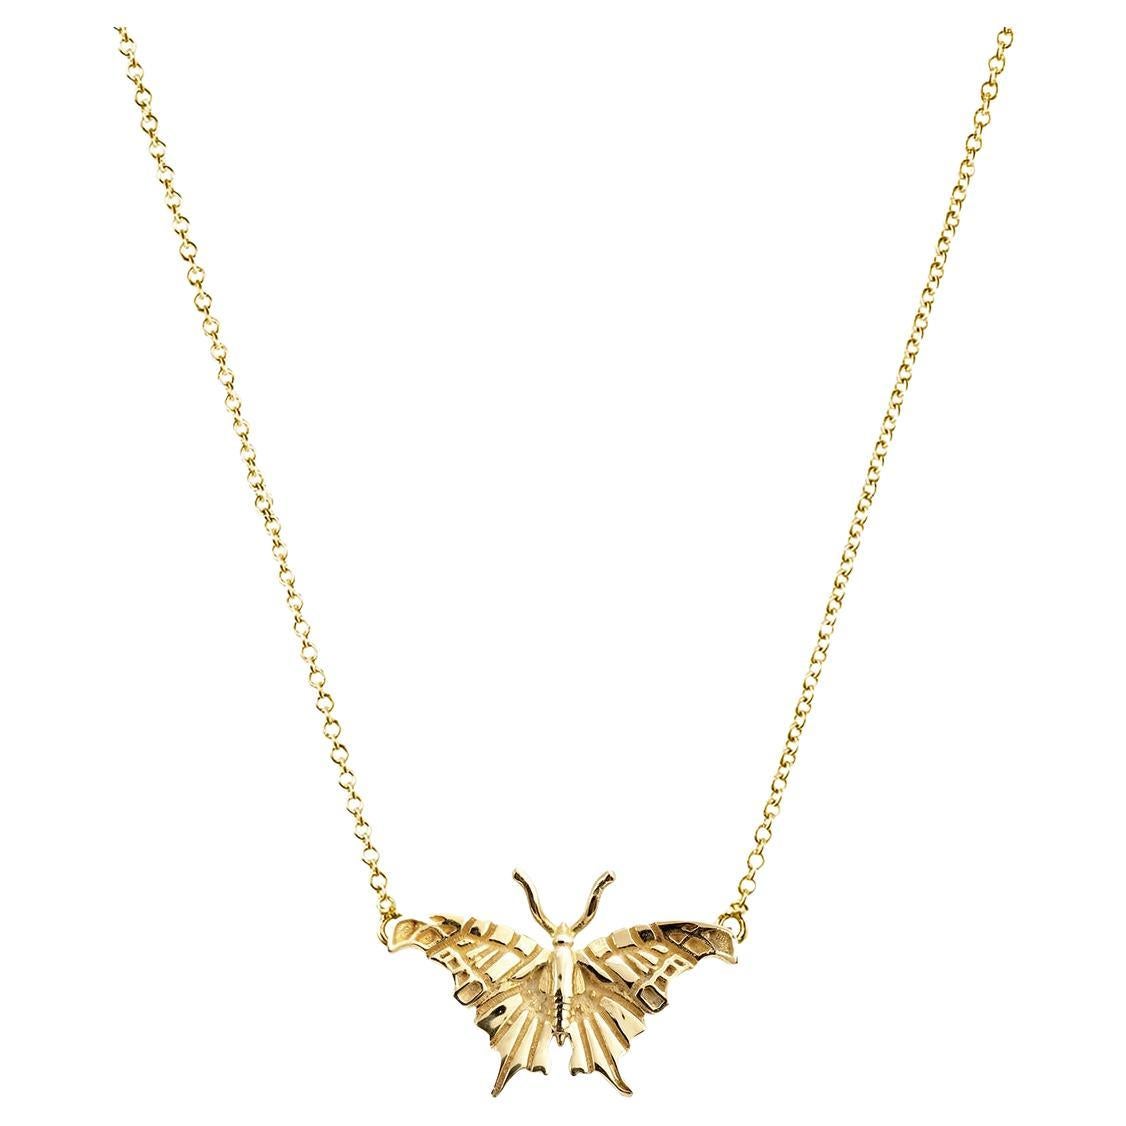 Capture the essence of elegance and grace with our Small Butterfly Solid Gold Necklace. Crafted from exquisite 14k yellow gold, this captivating piece is designed to make a statement. Adorned with a shimmering butterfly pendant, measuring 9mm in